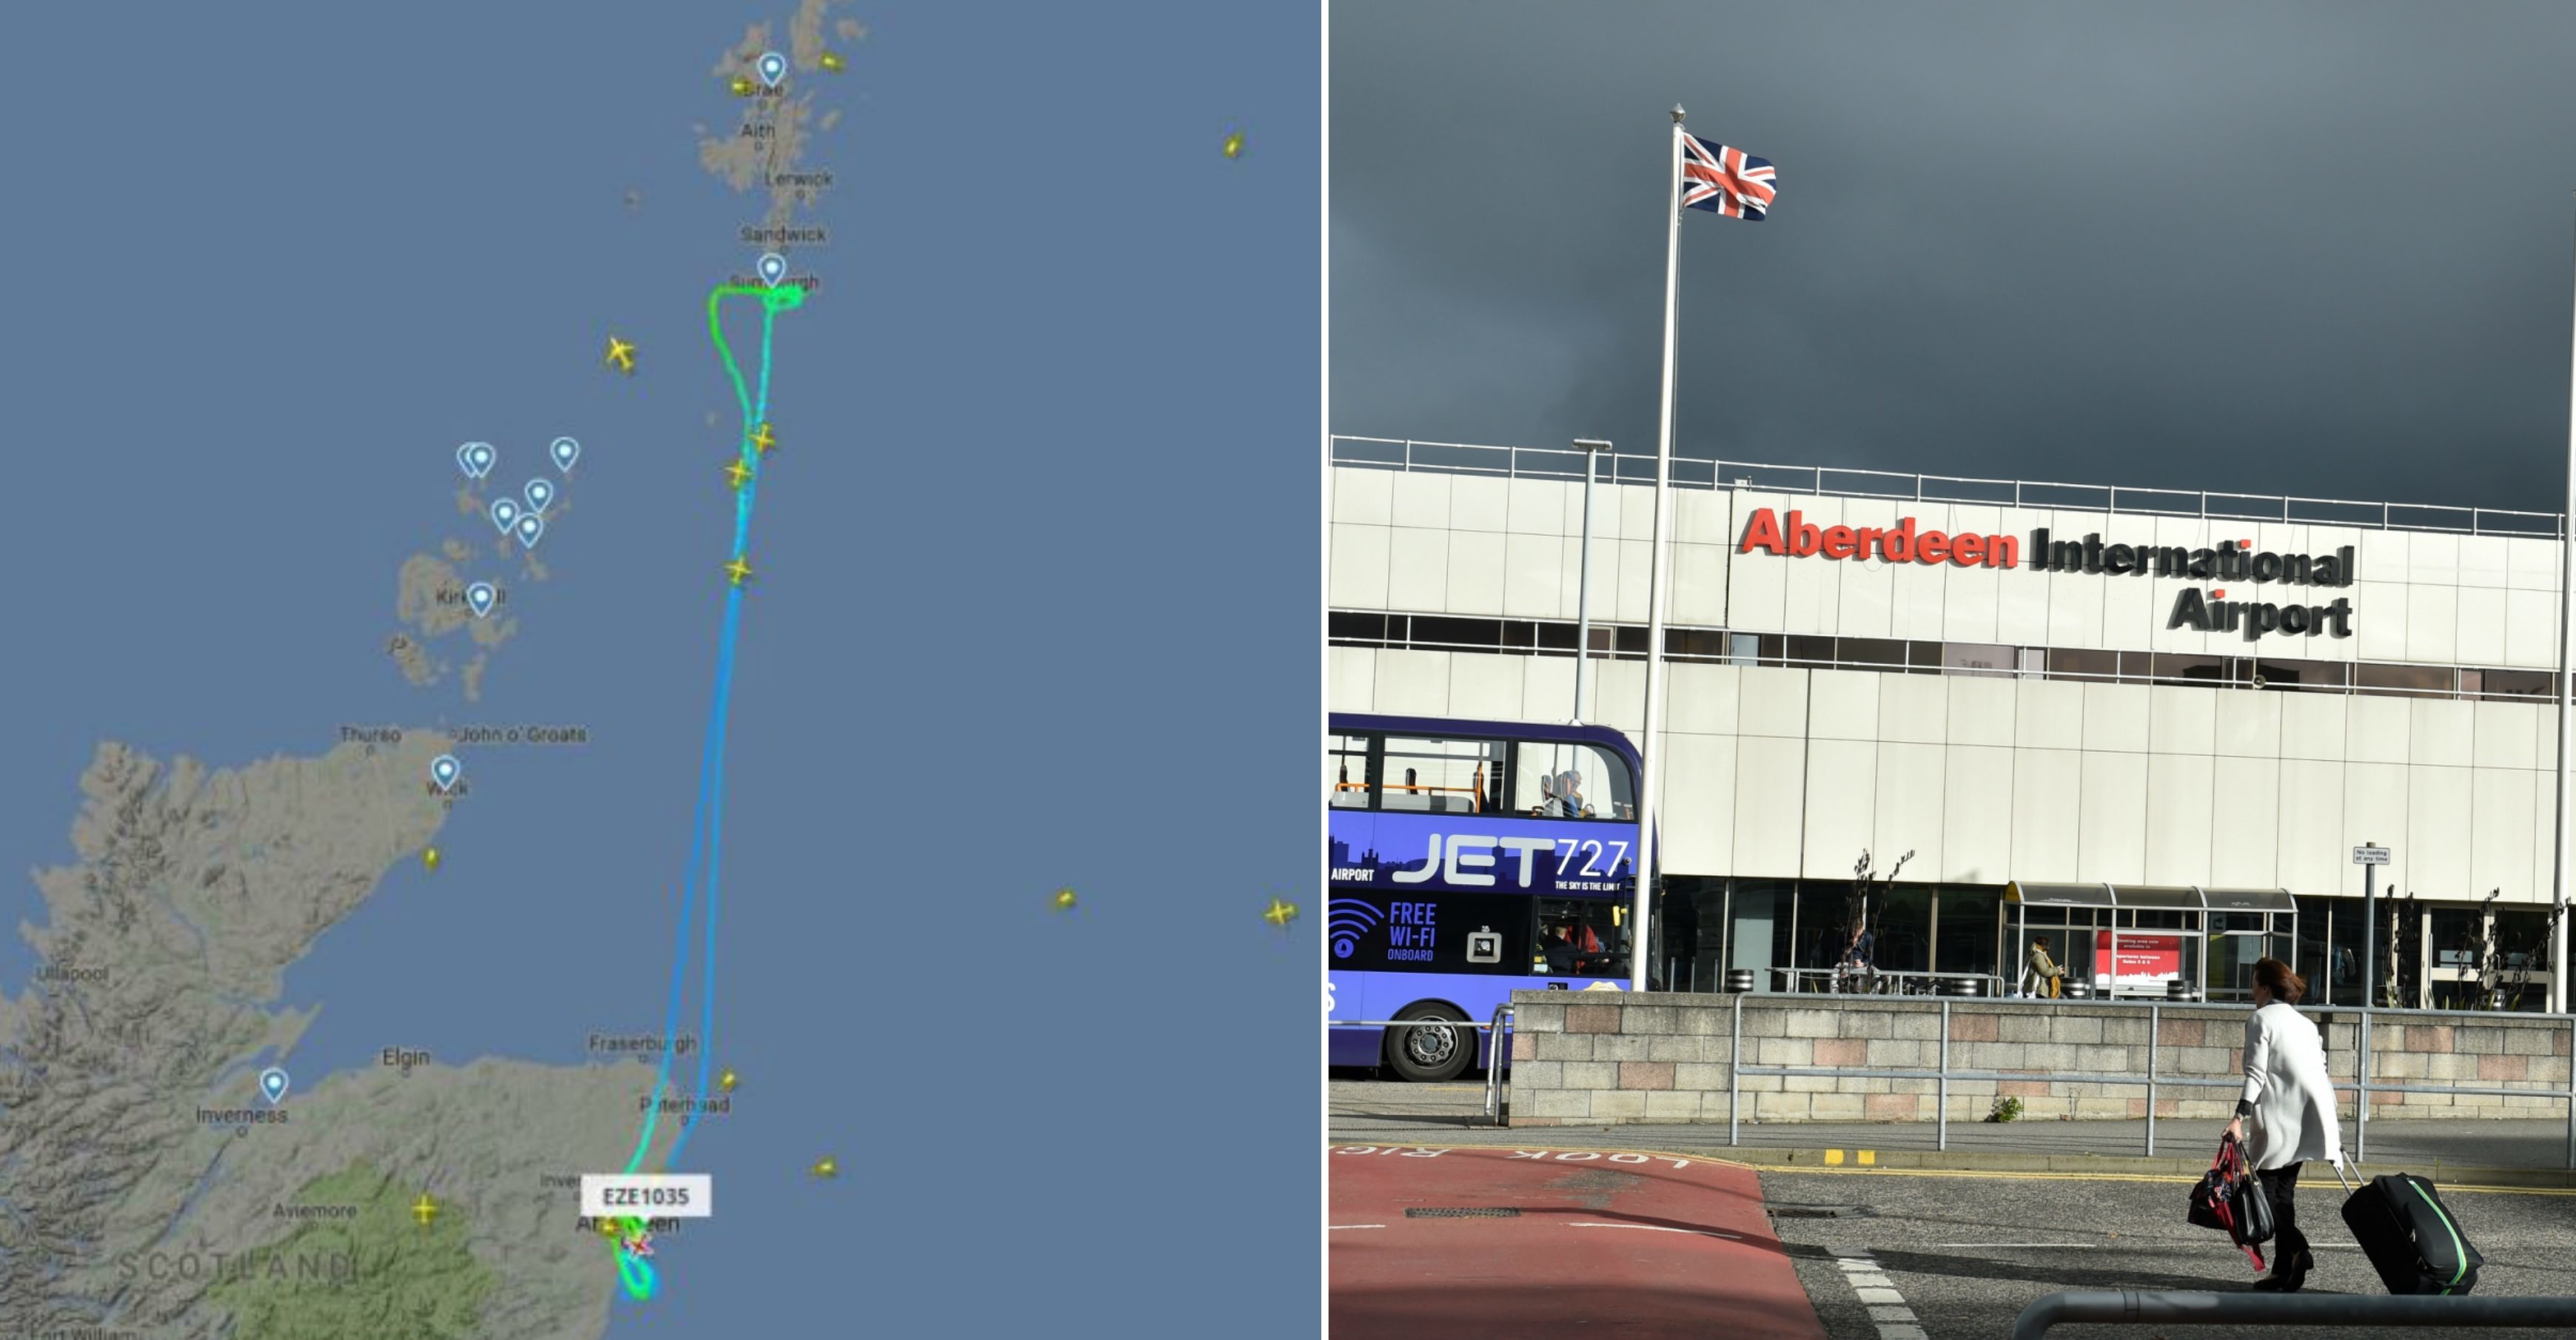 The path of the plane as indicated on Flightradar24, left, and Aberdeen Airport, right.